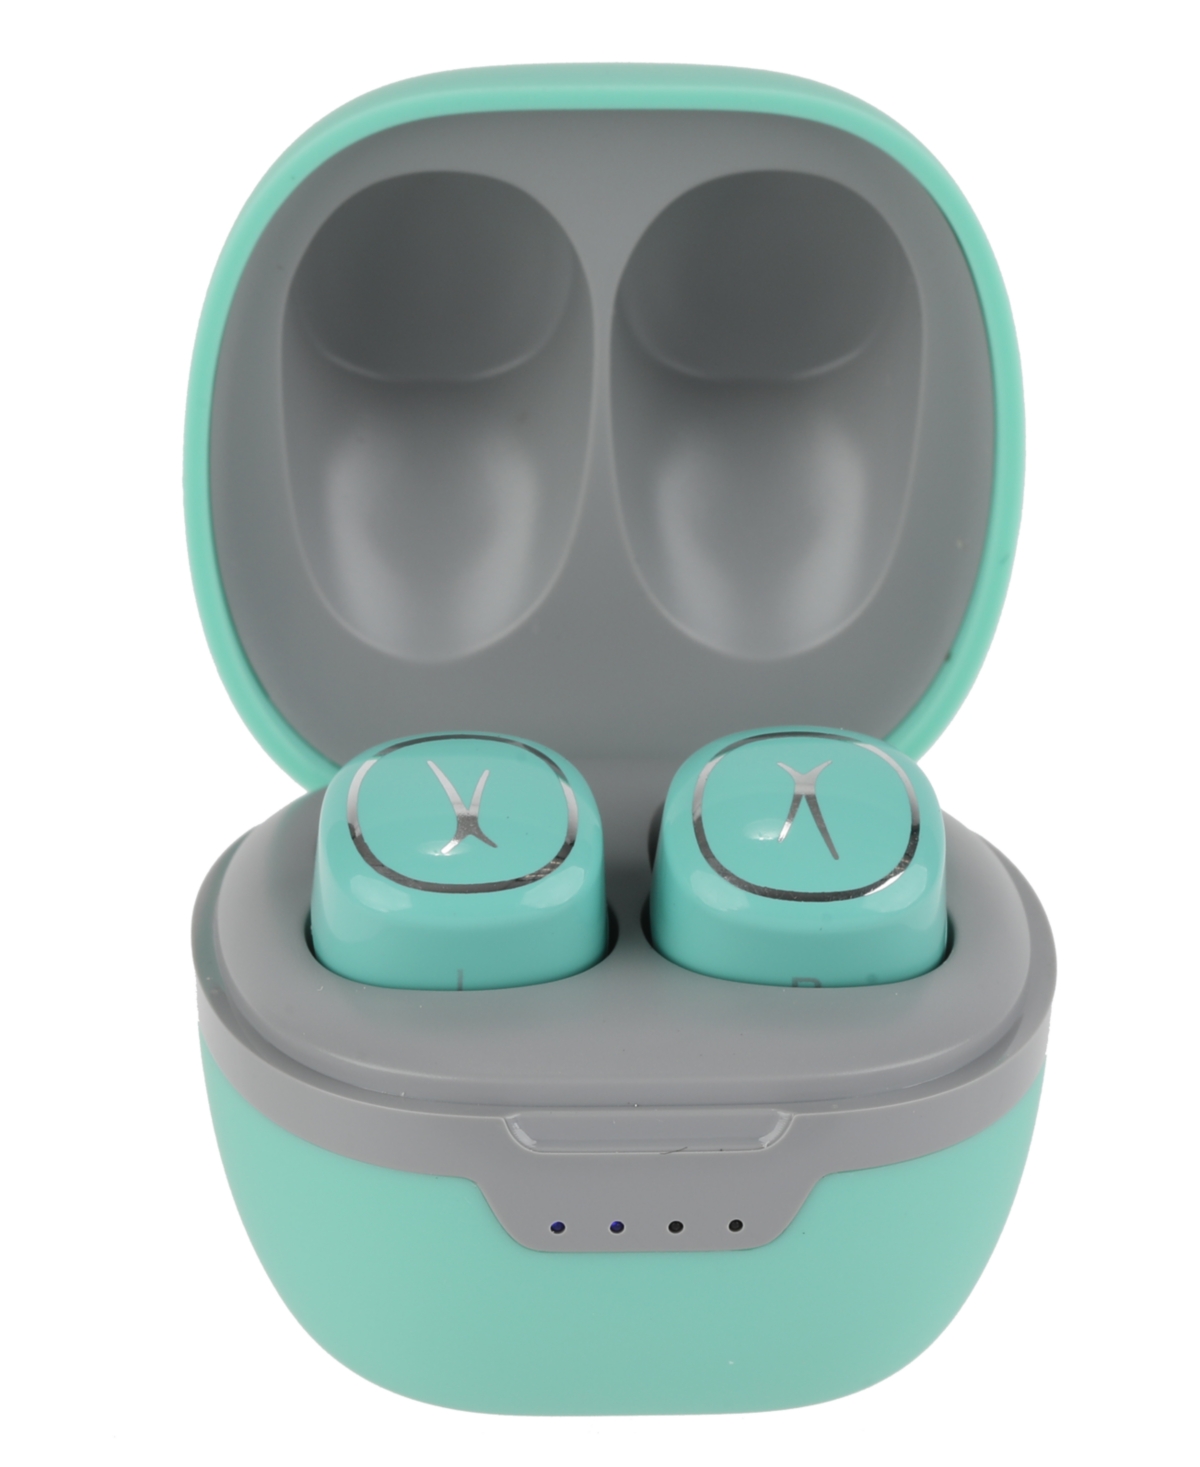 Altec Lansing Nanobud 2.0 True Wireless, Earbuds With Charging Case In Mint